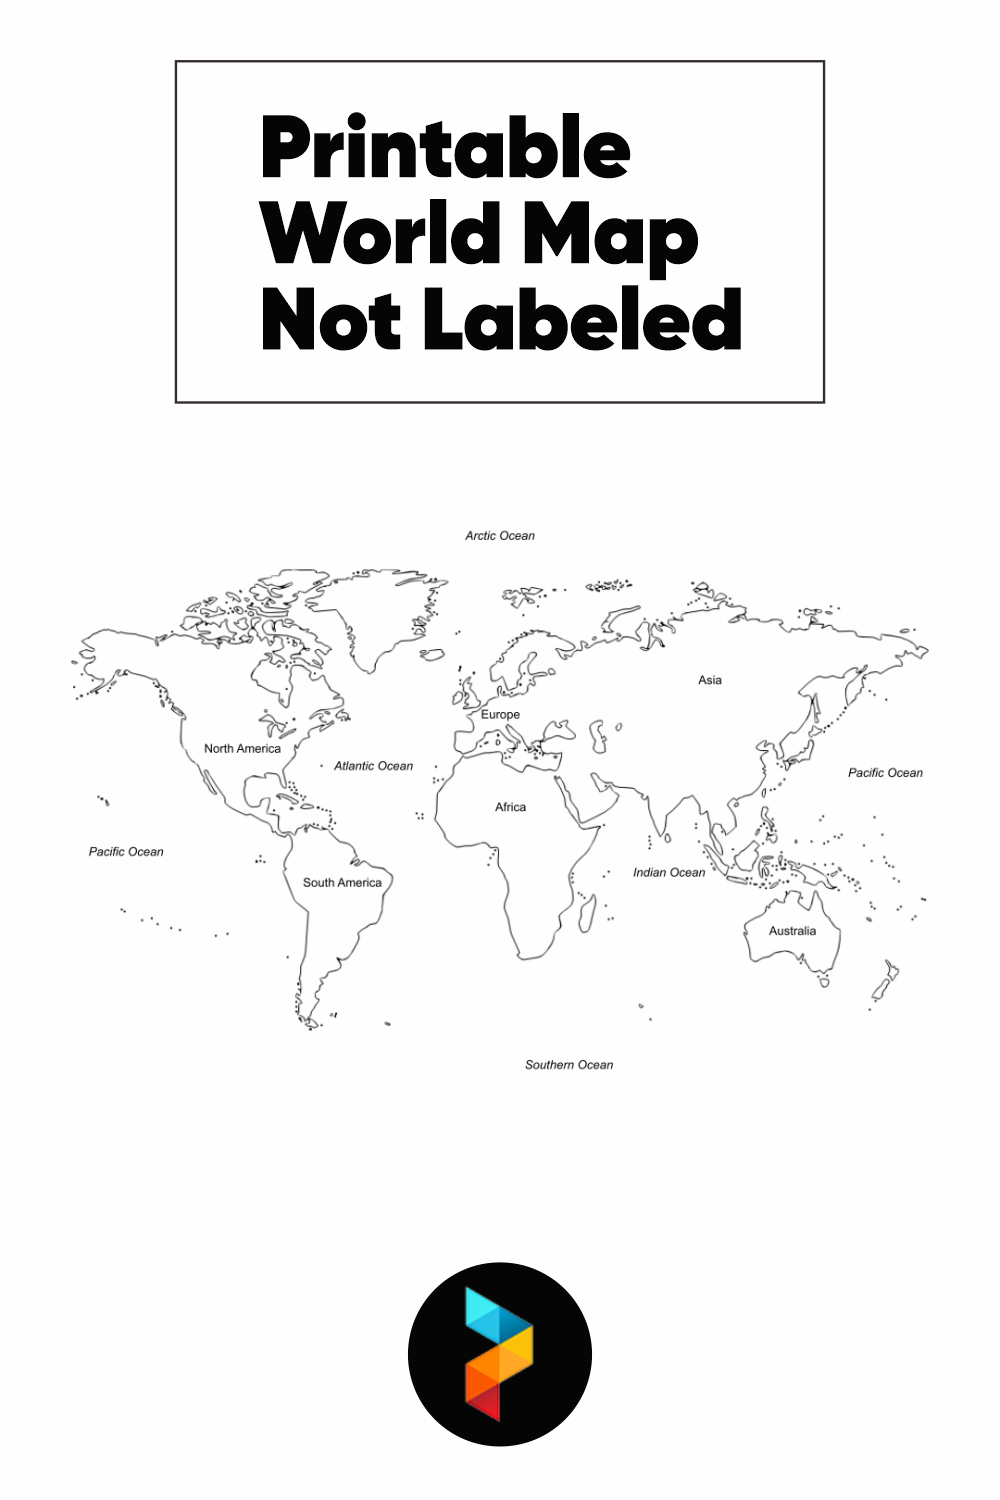 Printable World Map Not Labeled